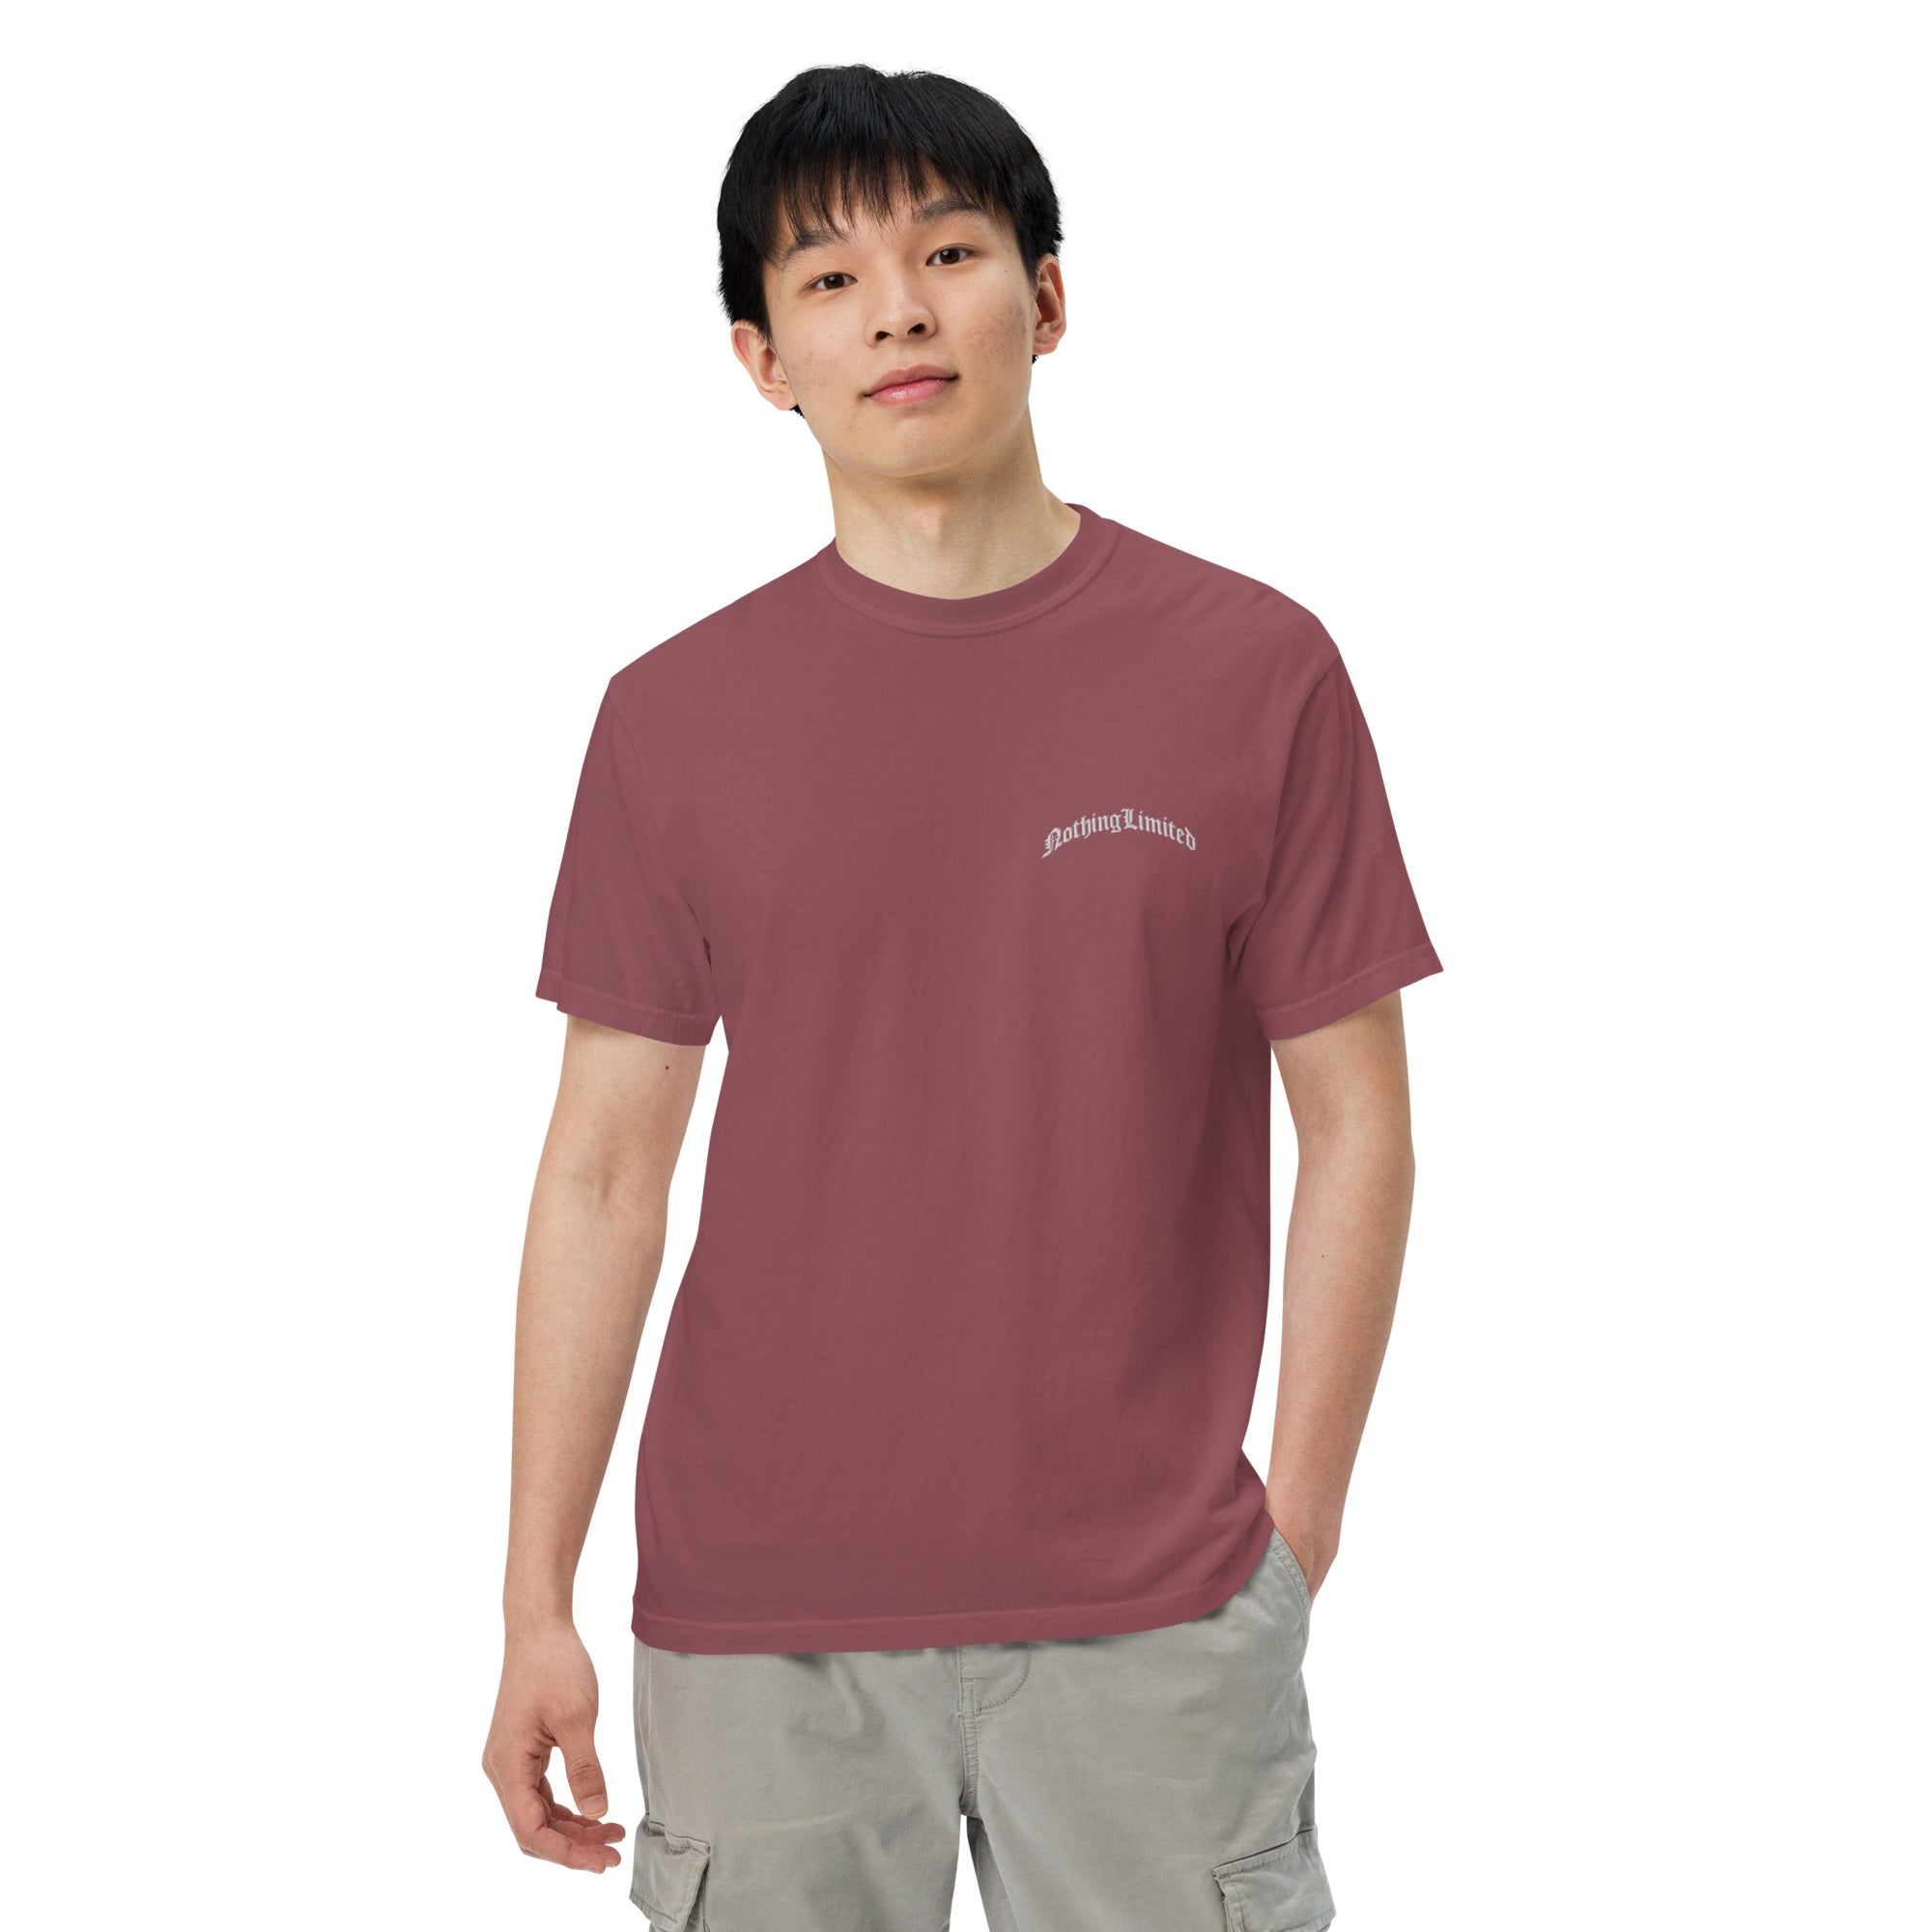 Men’s garment-dyed heavyweight embroidered “NOMPTON” tee